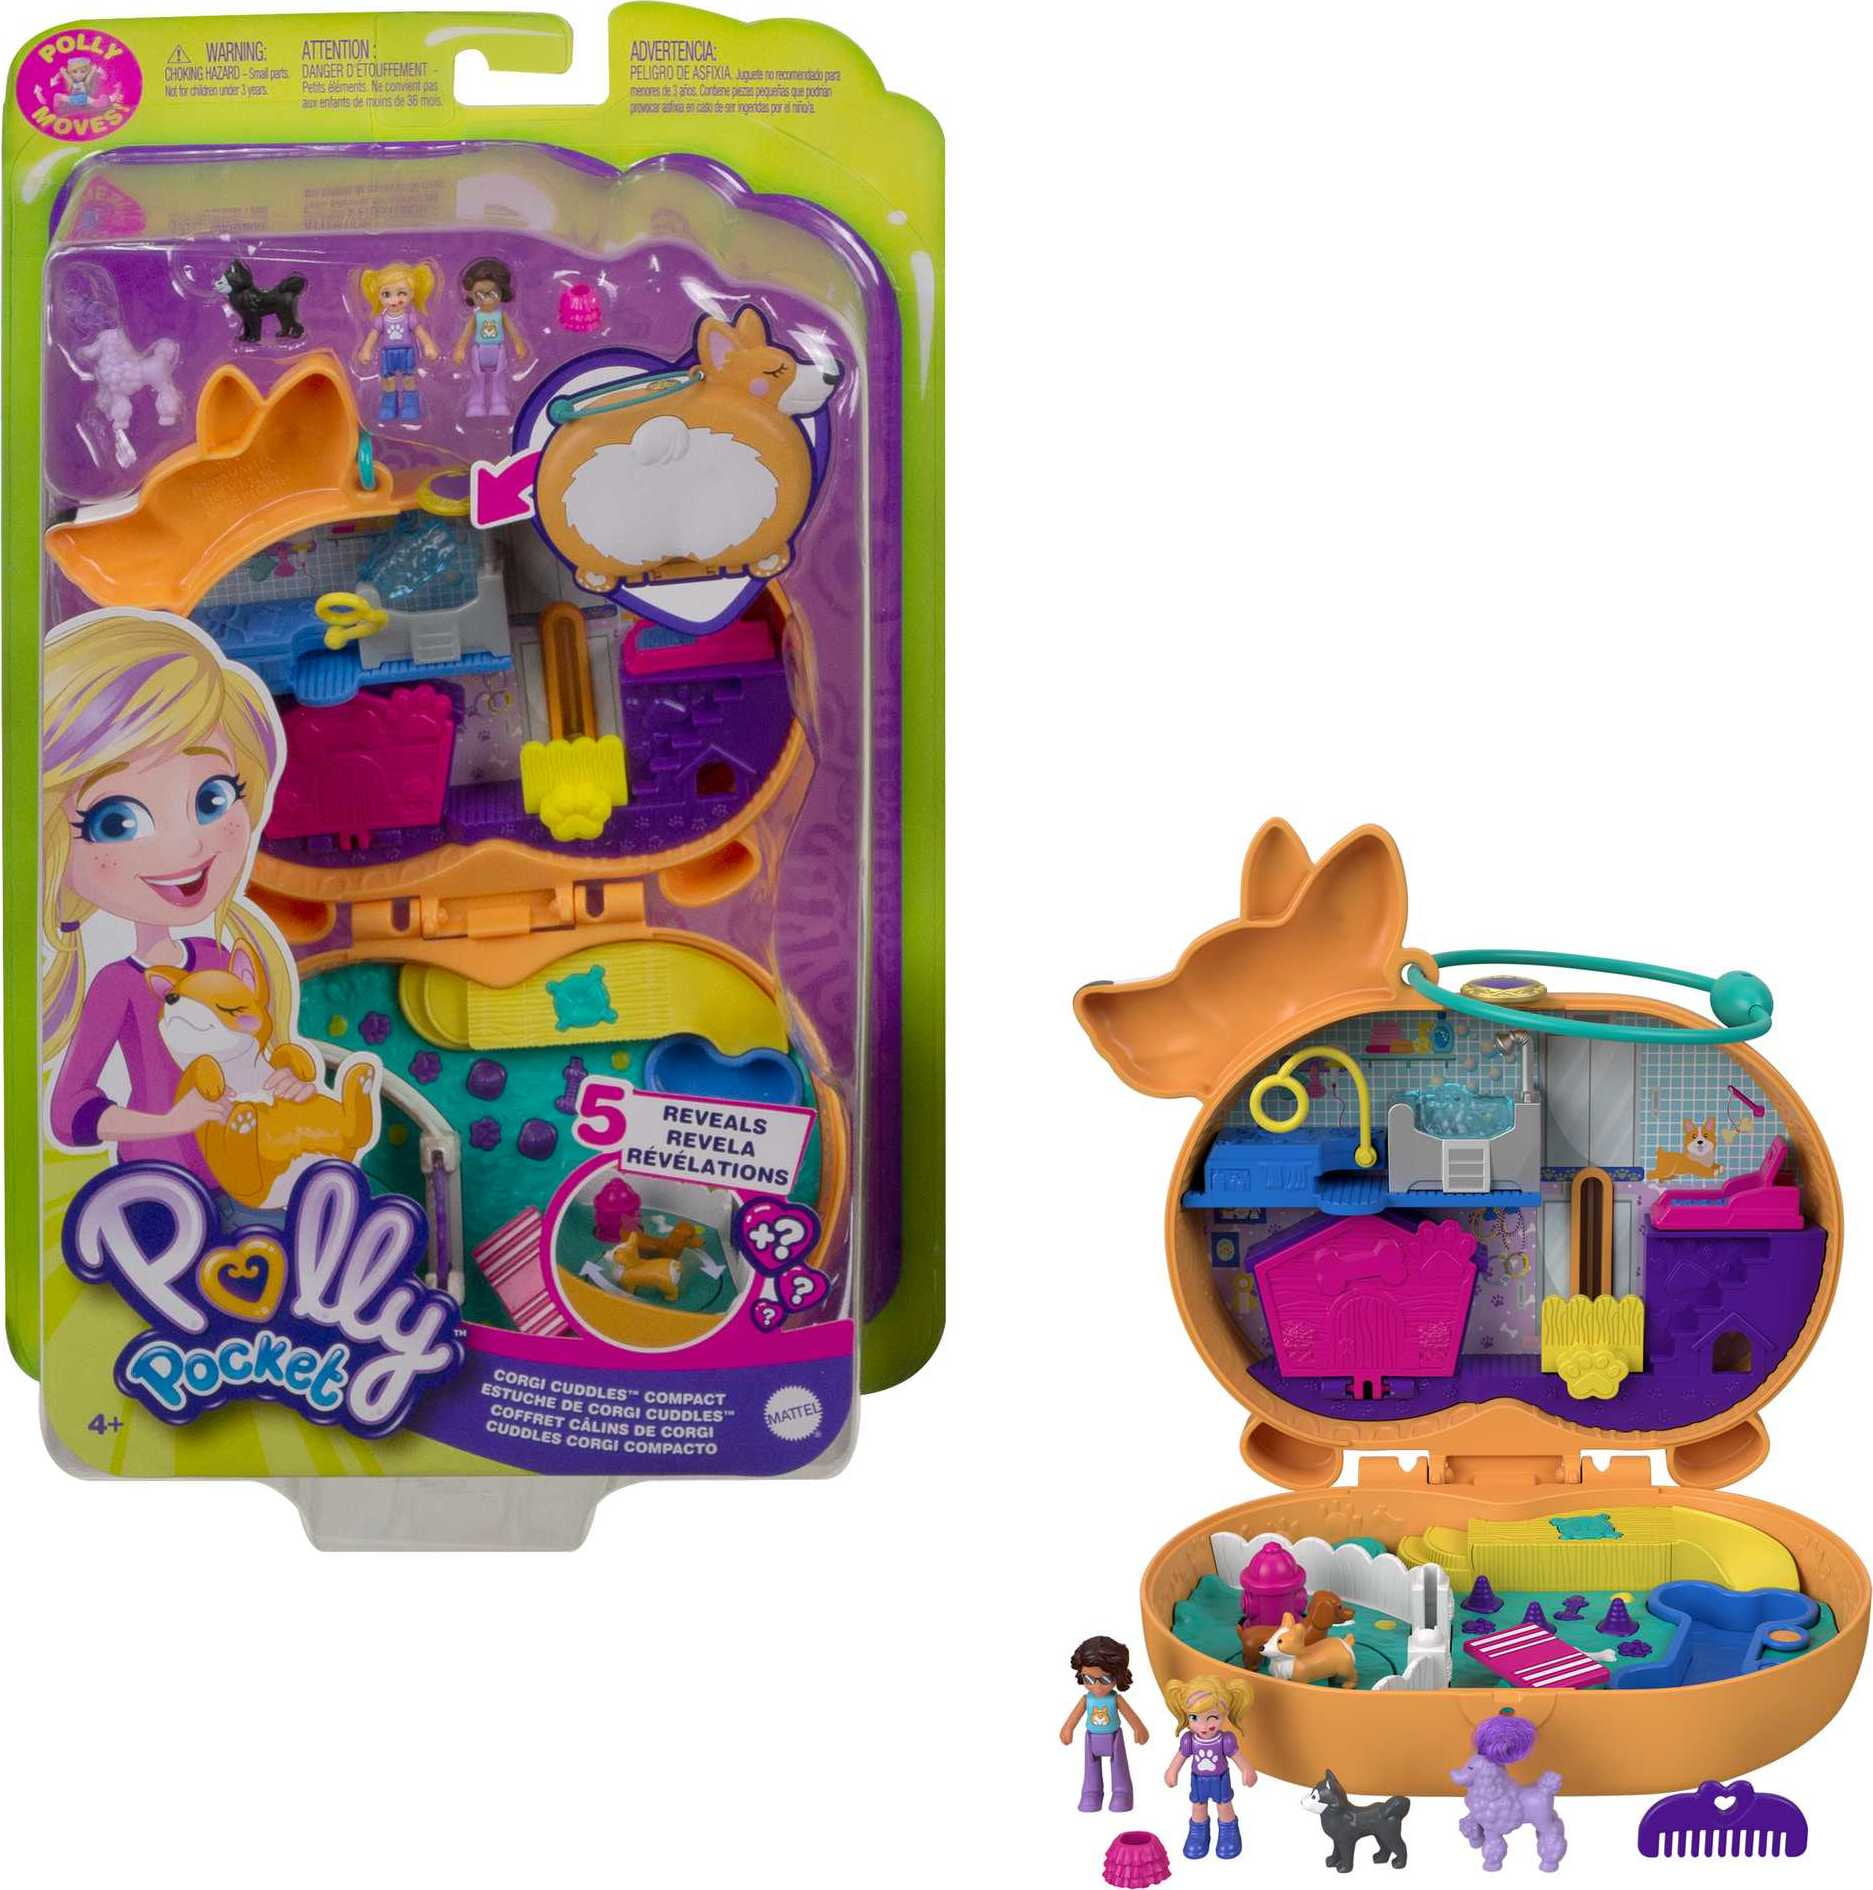 Polly Pocket Jungle Safari Compact 2 Micro Dolls /& Accessories Toy Gjk53 for sale online